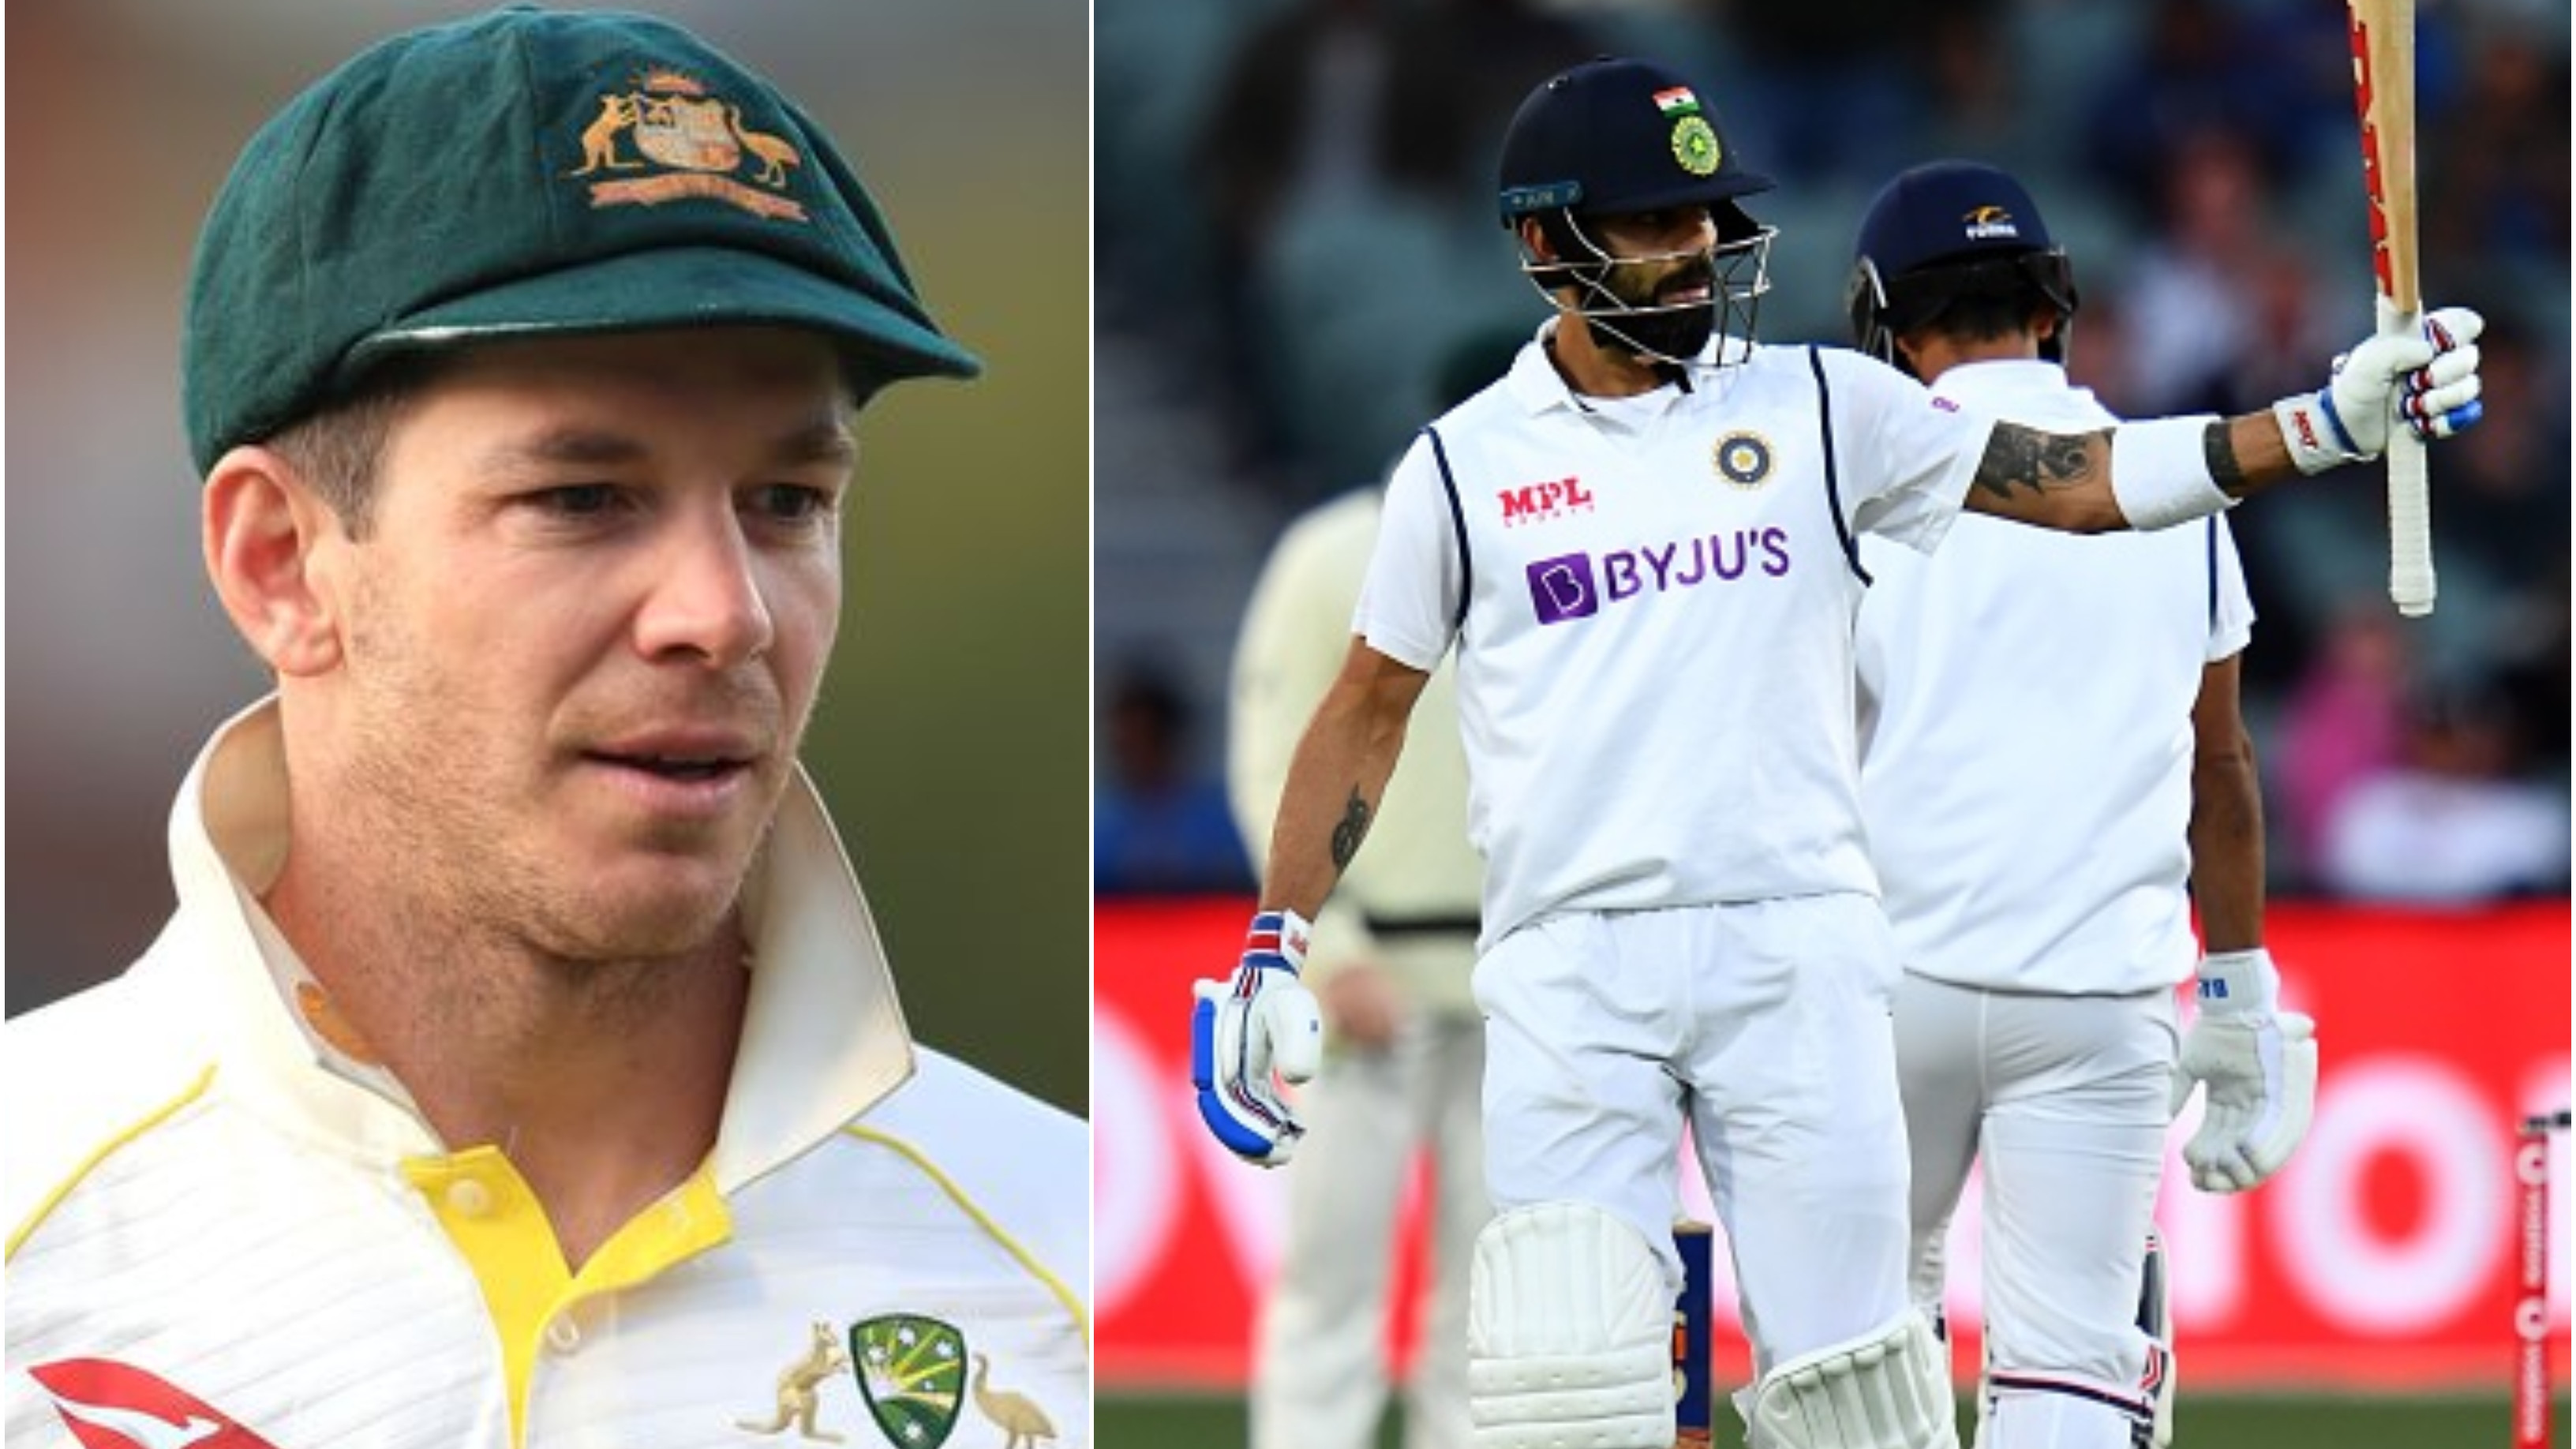 “I was like 'Wow, He did not look like getting out'...” Tim Paine recalls the time when Kohli made batting look easy